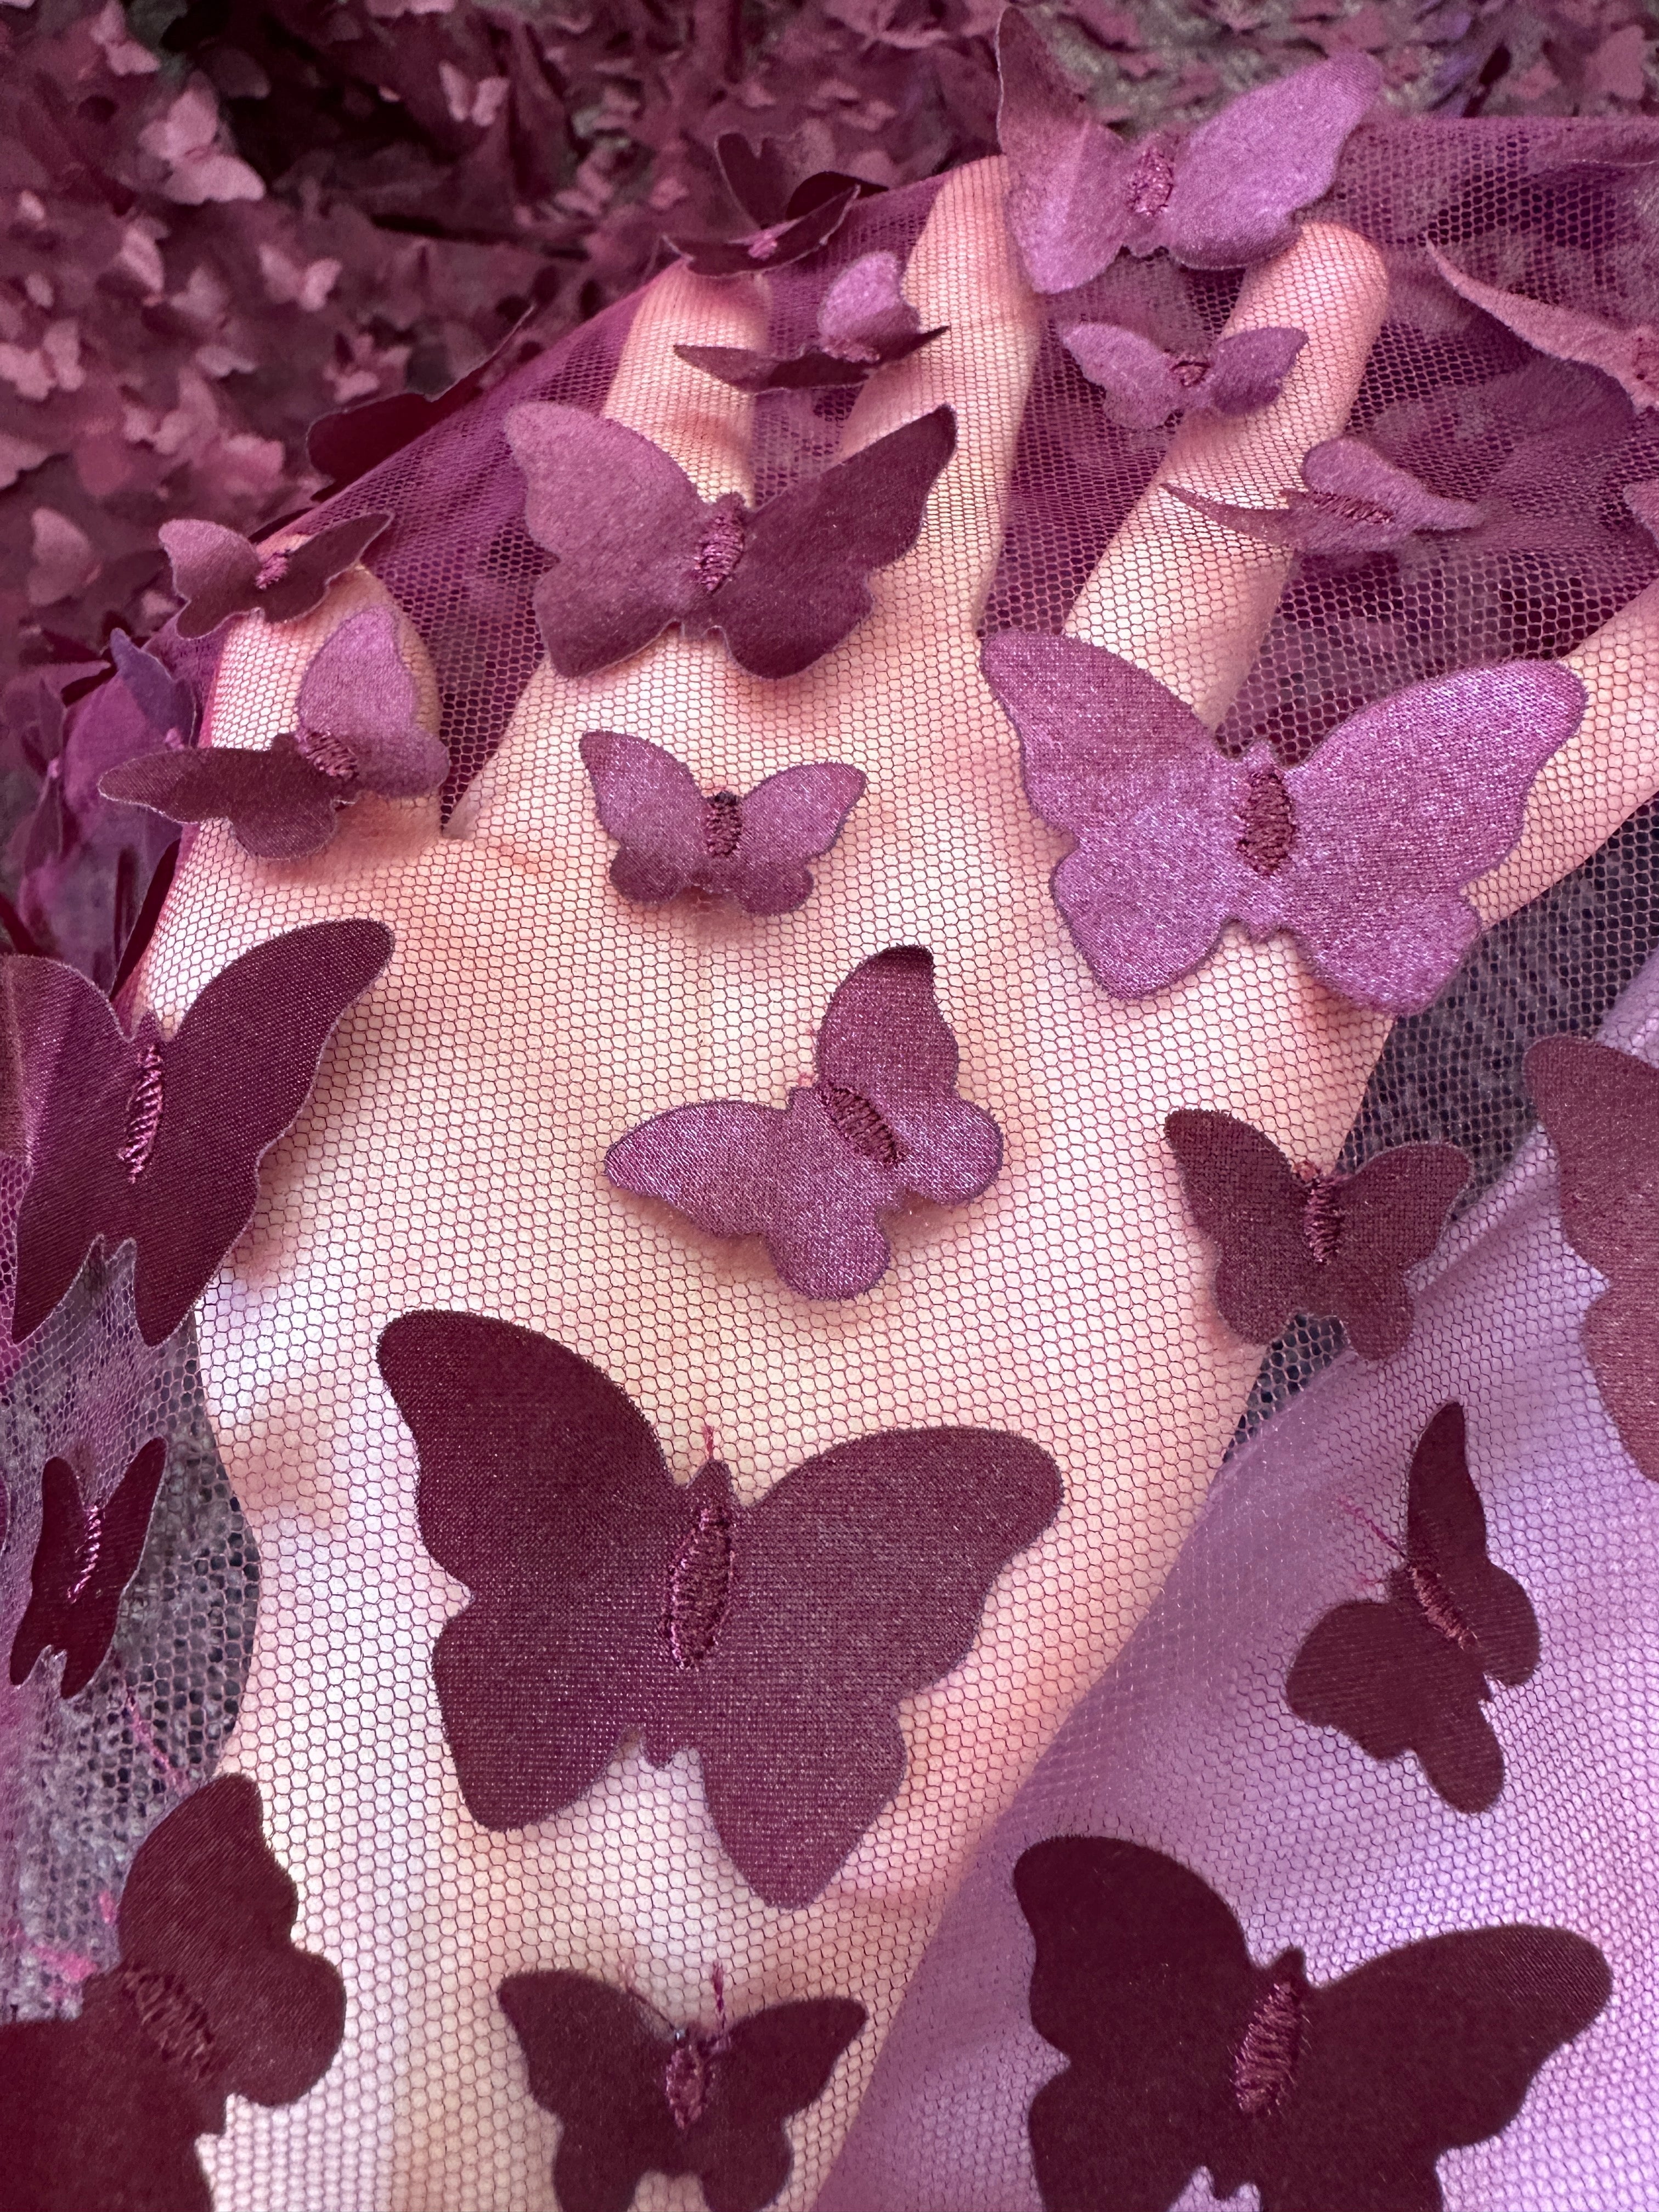 burgundy 3D Butterfly Lace, maroon Butterfly Tulle By The Yard, light red Tulle Lace Fabric, Dress Fabric, Bridal Lace Fabric, premium lace fabric, lace fabric on discount, lace fabric in low price, buy lace fabric online, lace fabric on sale